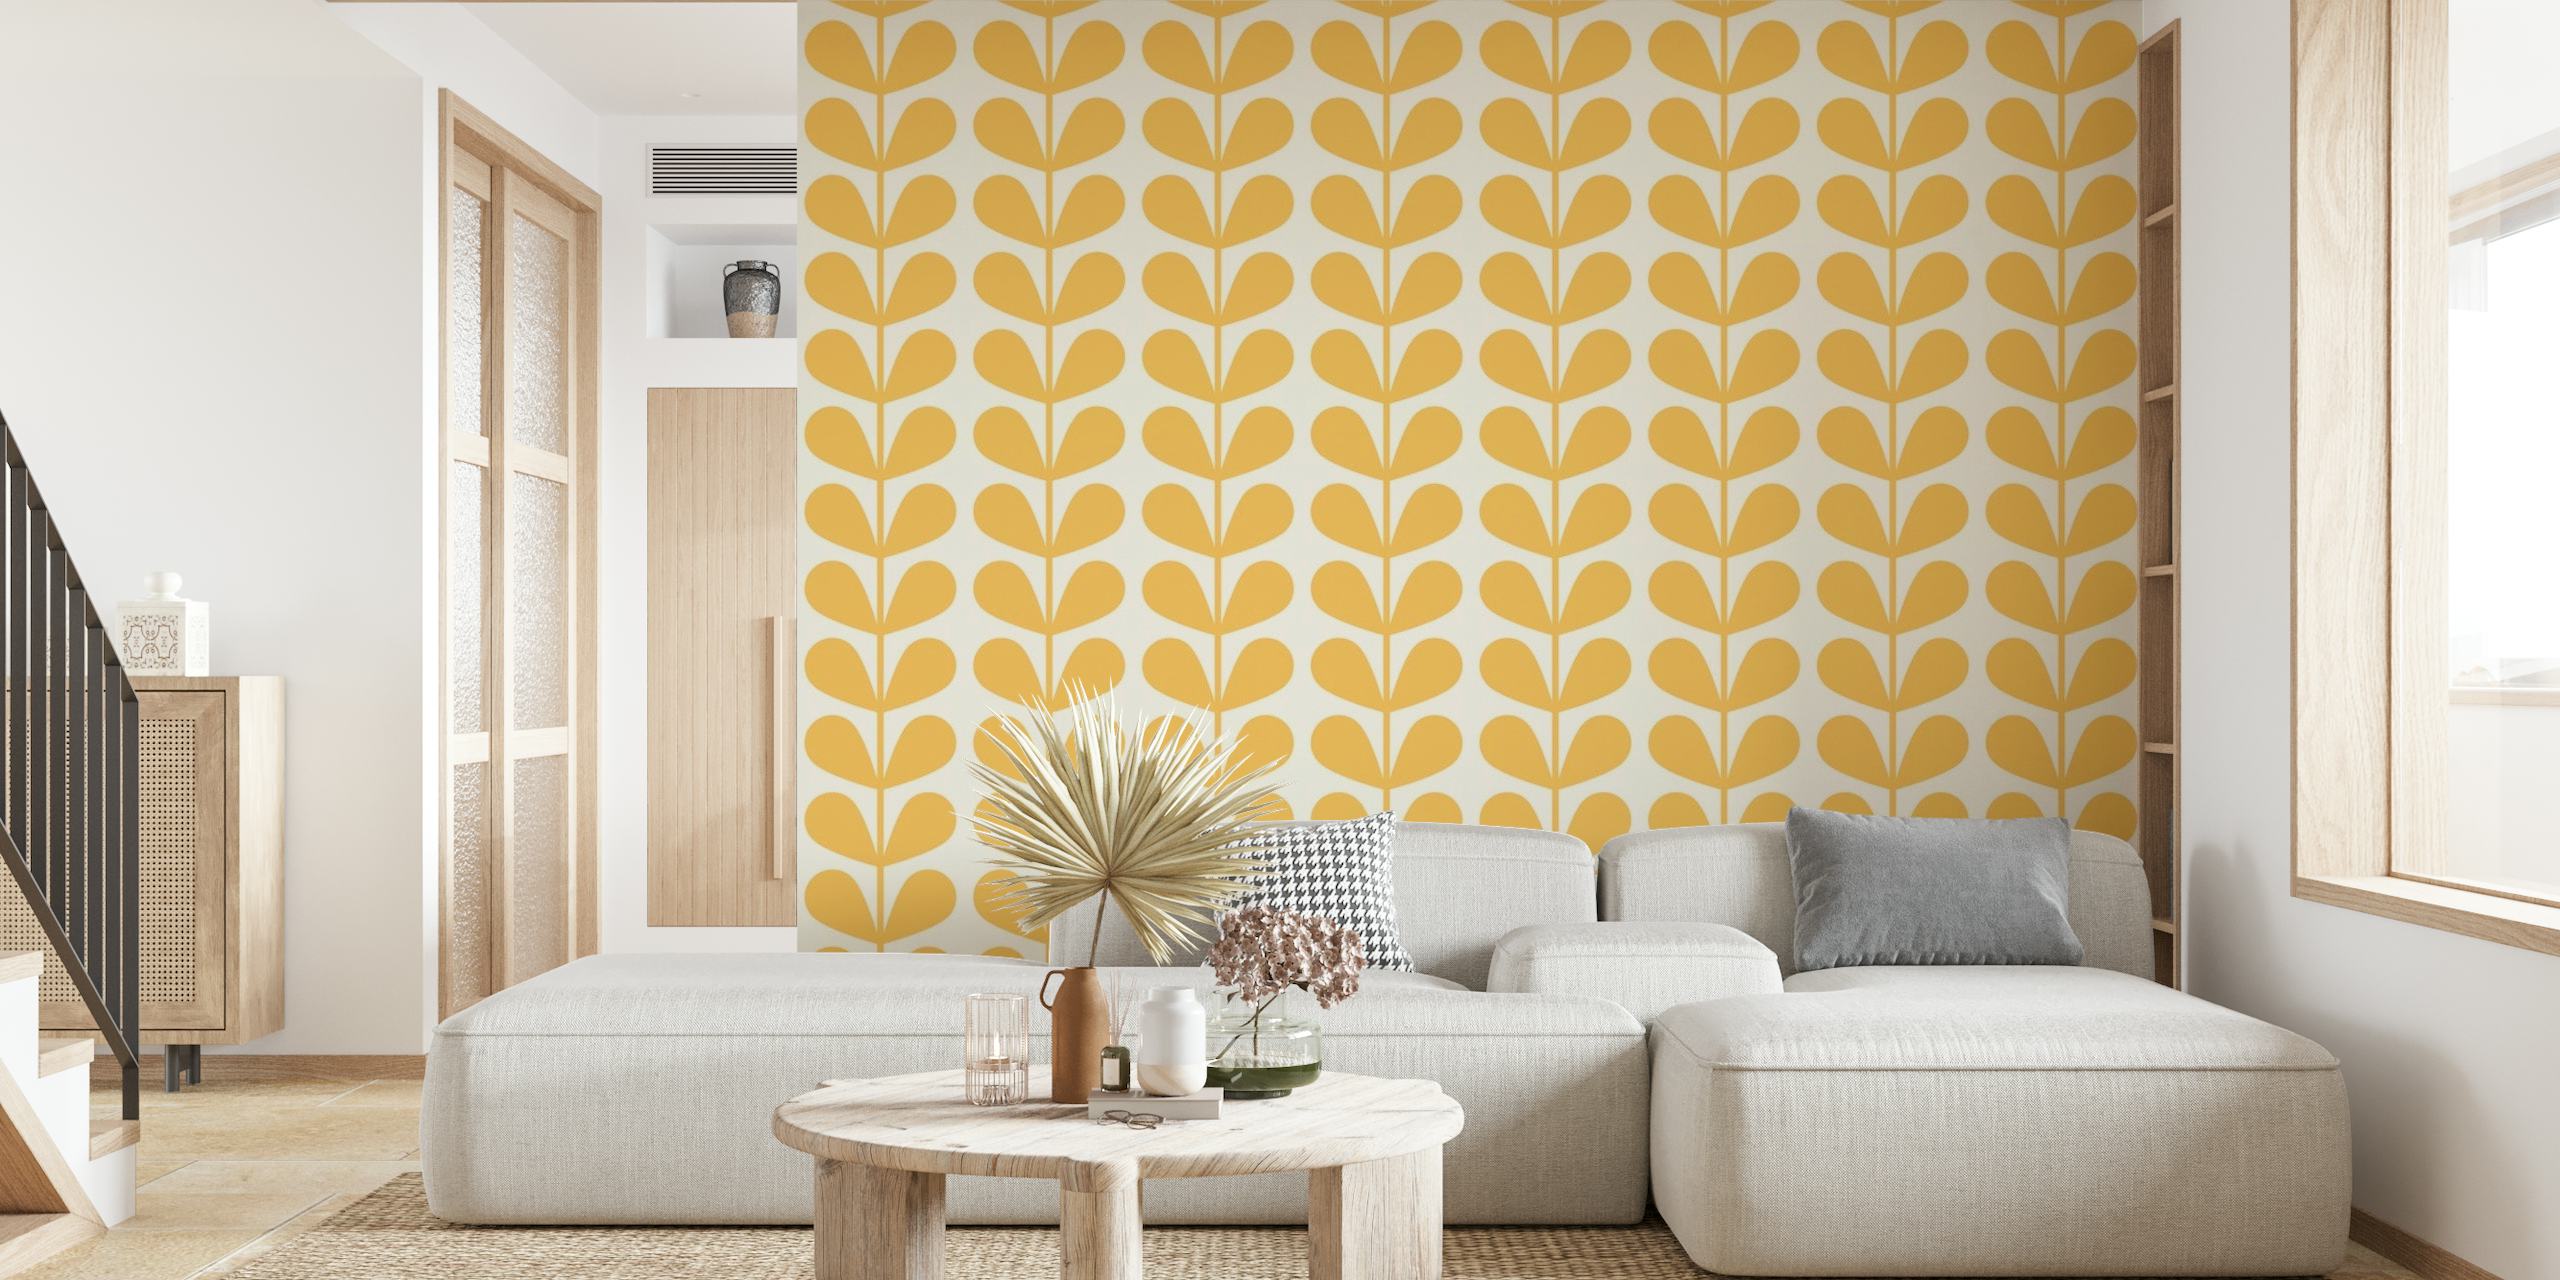 Mid-century style leaf pattern wall mural in yellow and neutral tones